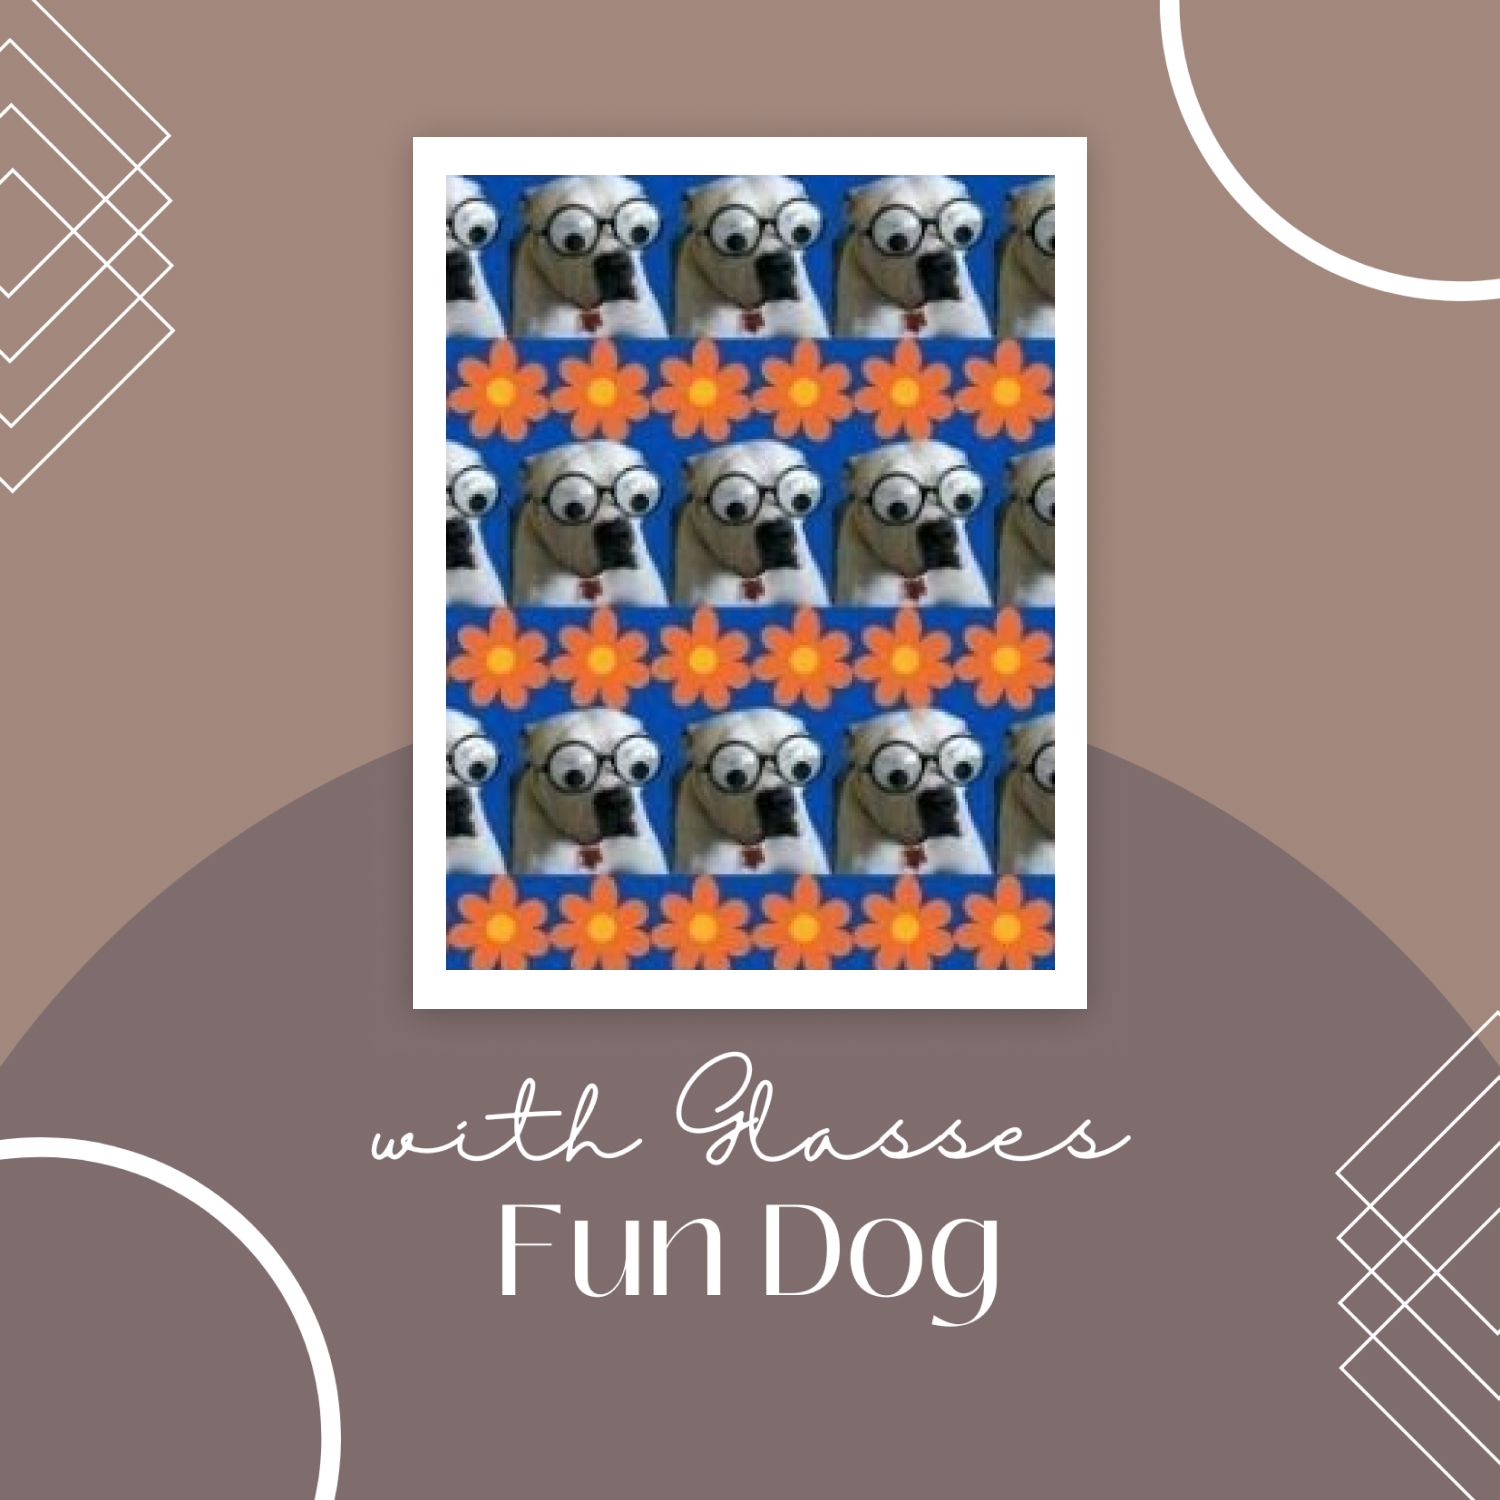 Fun Dog with Glasses Pattern/Background.